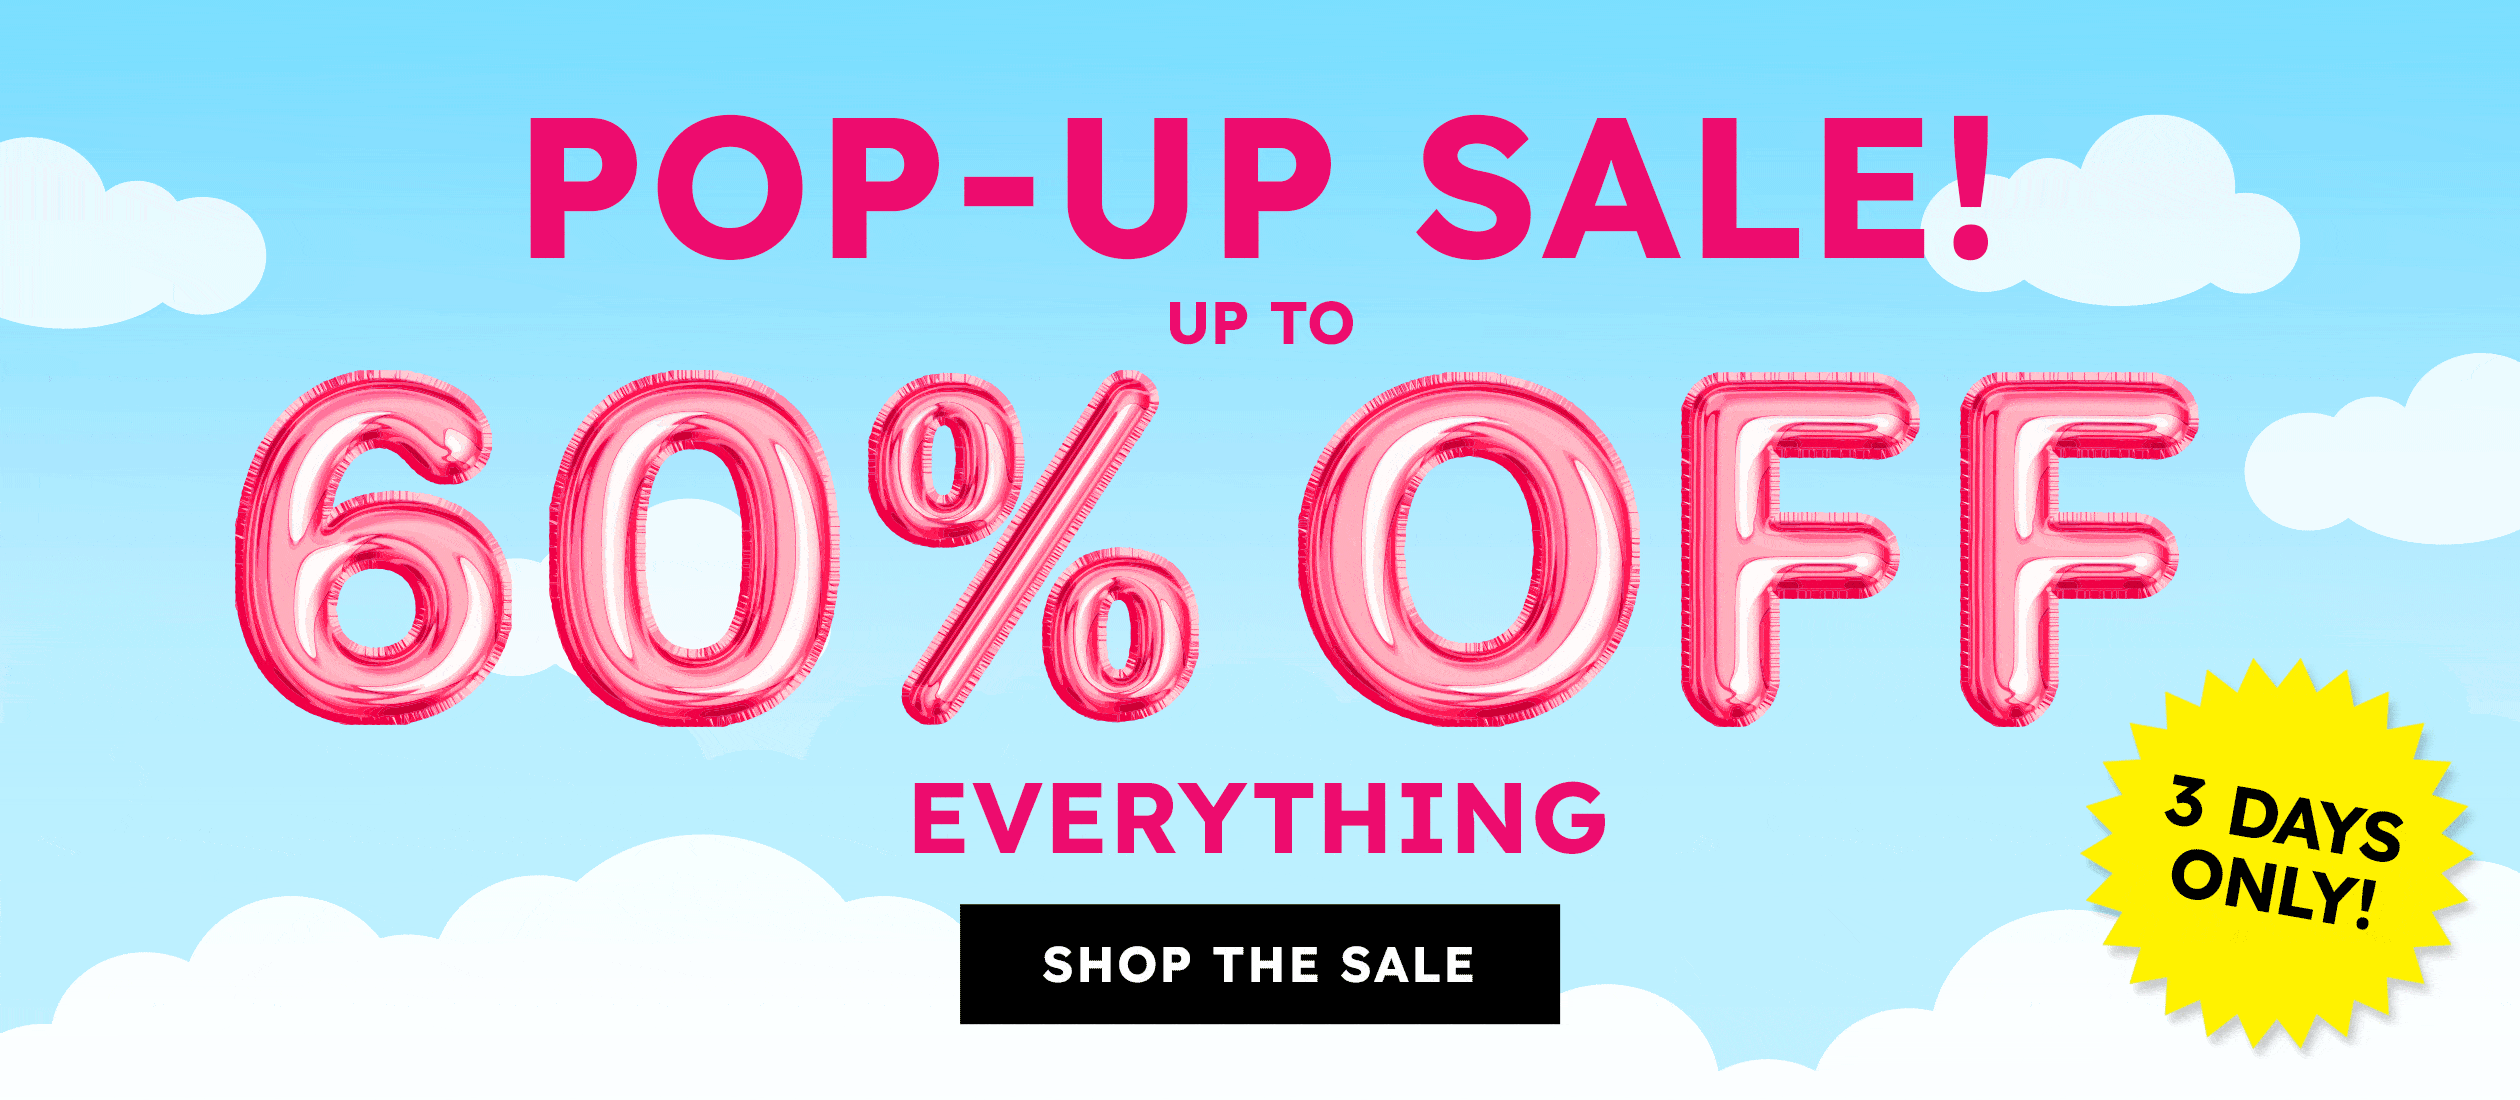 Pop upp sale up to 60% off everything shop the sale